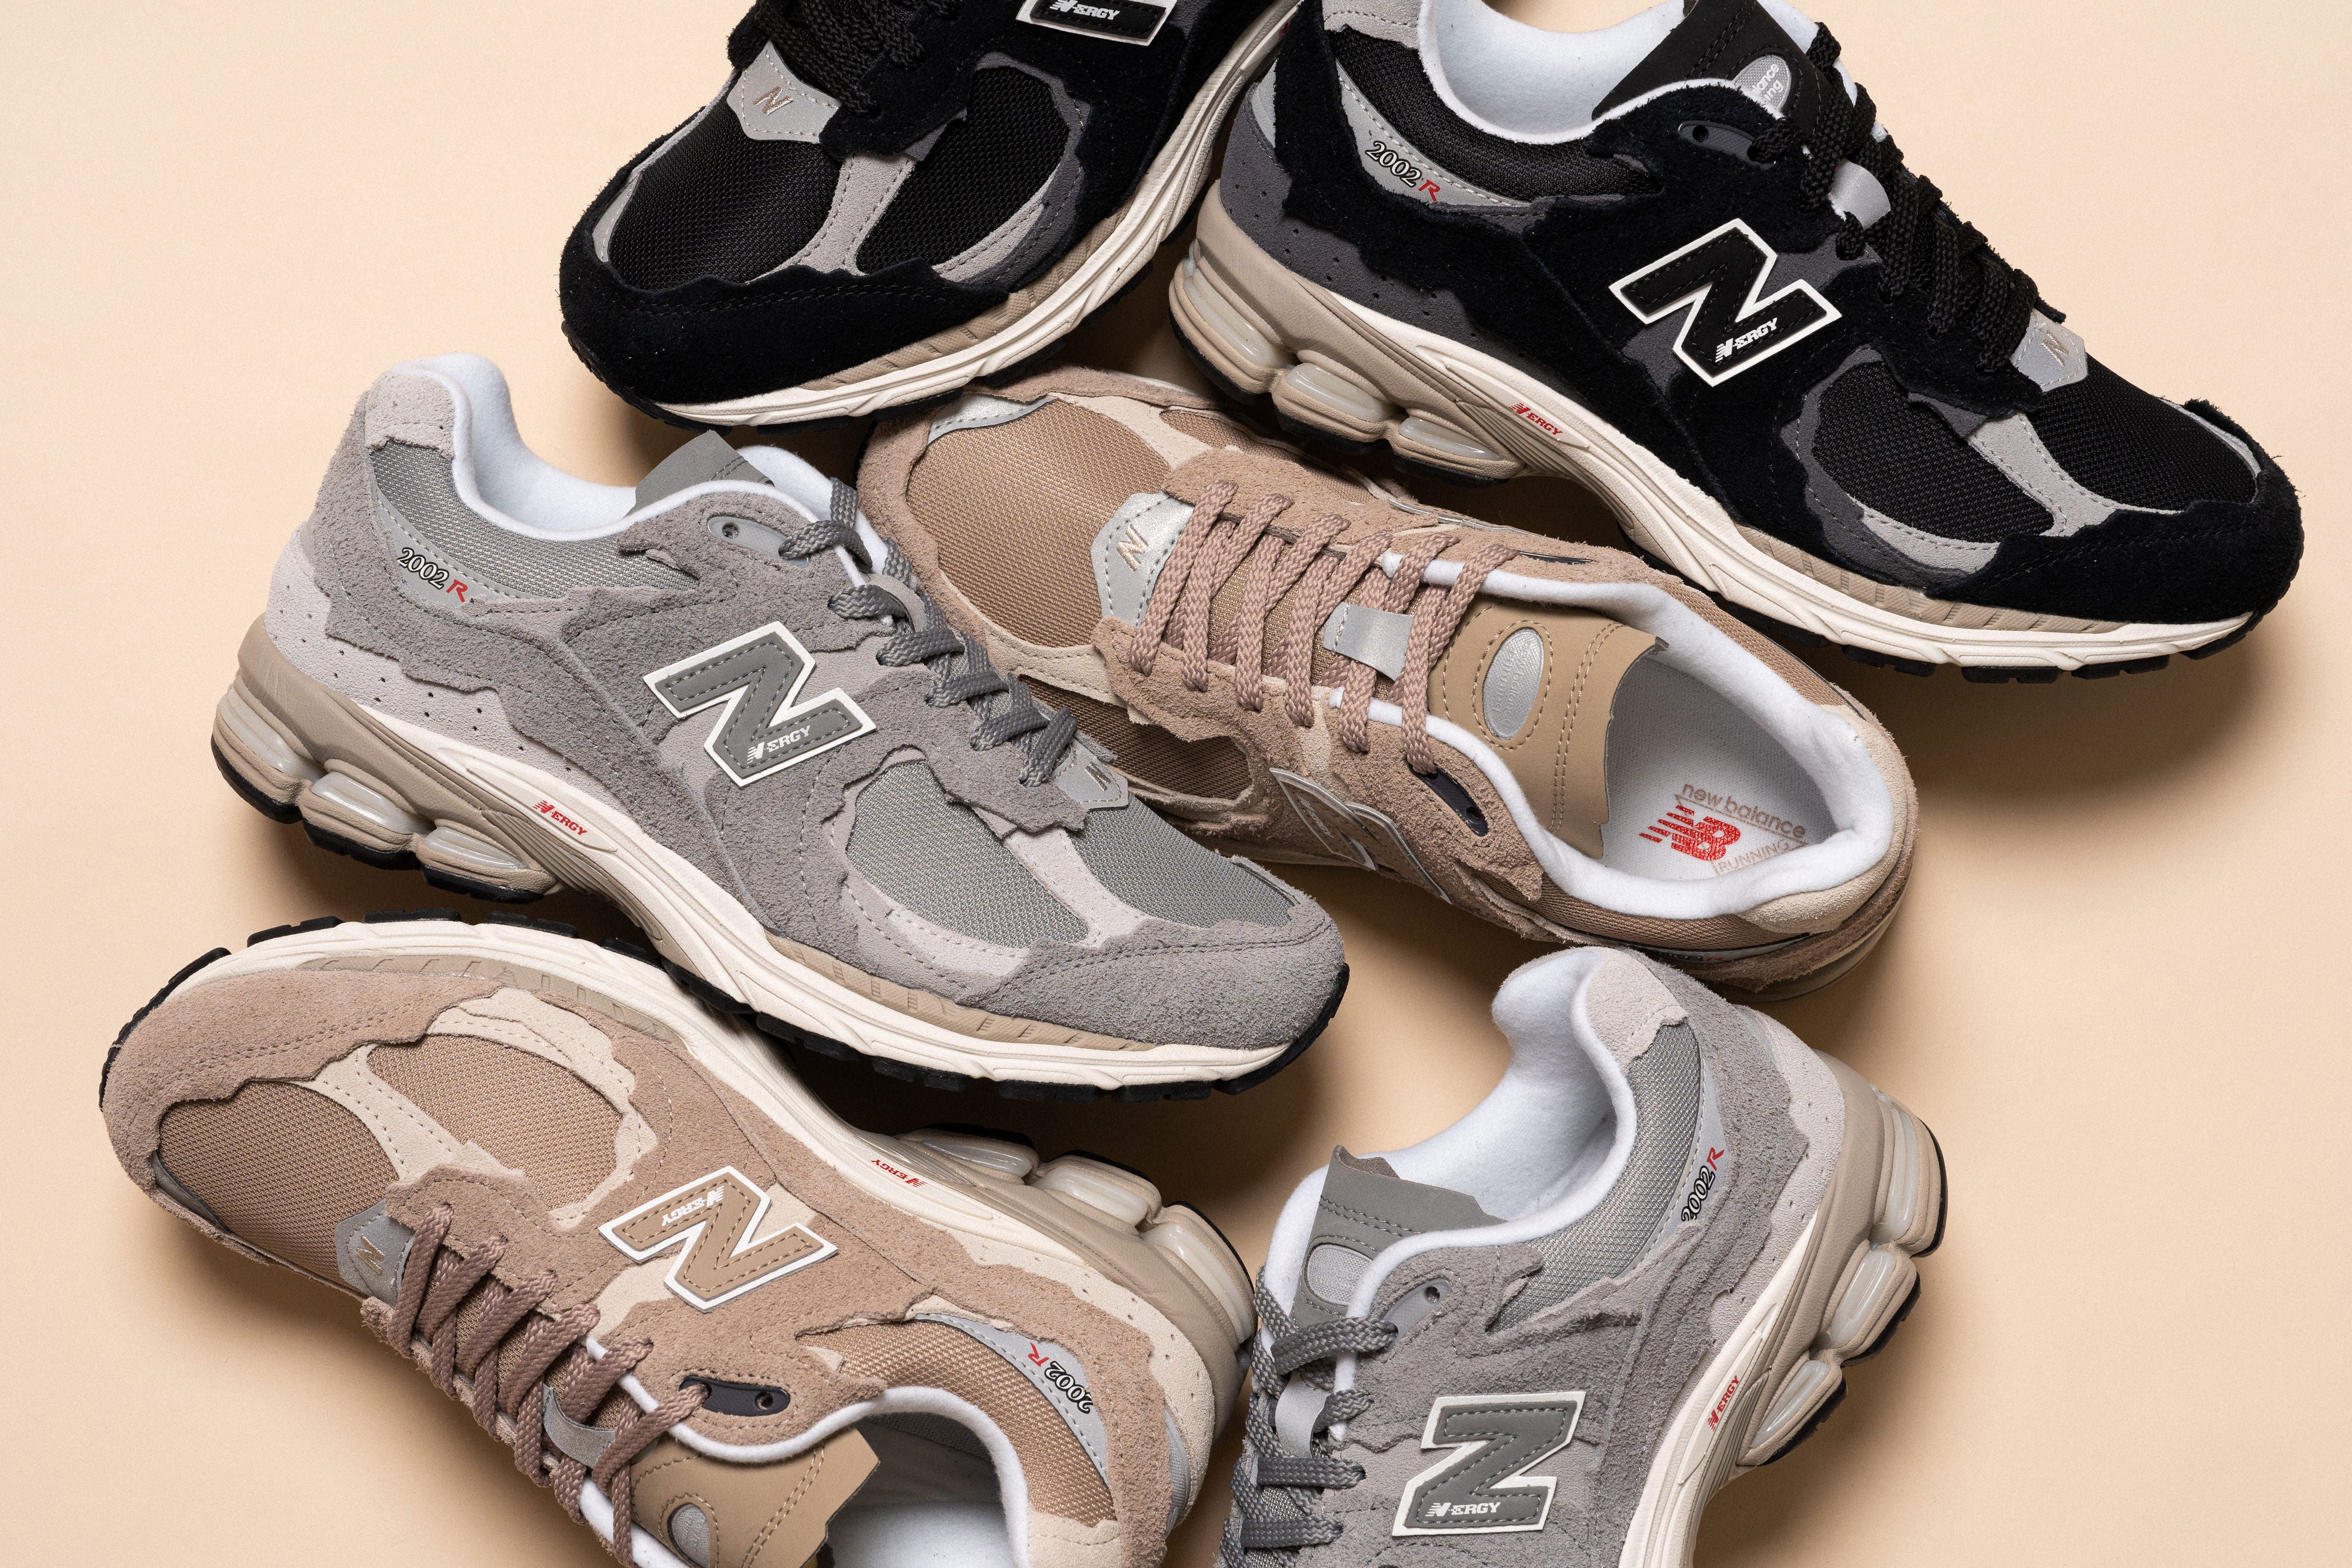 New Balance Refined Future Pack 27/4/23 – Capsule